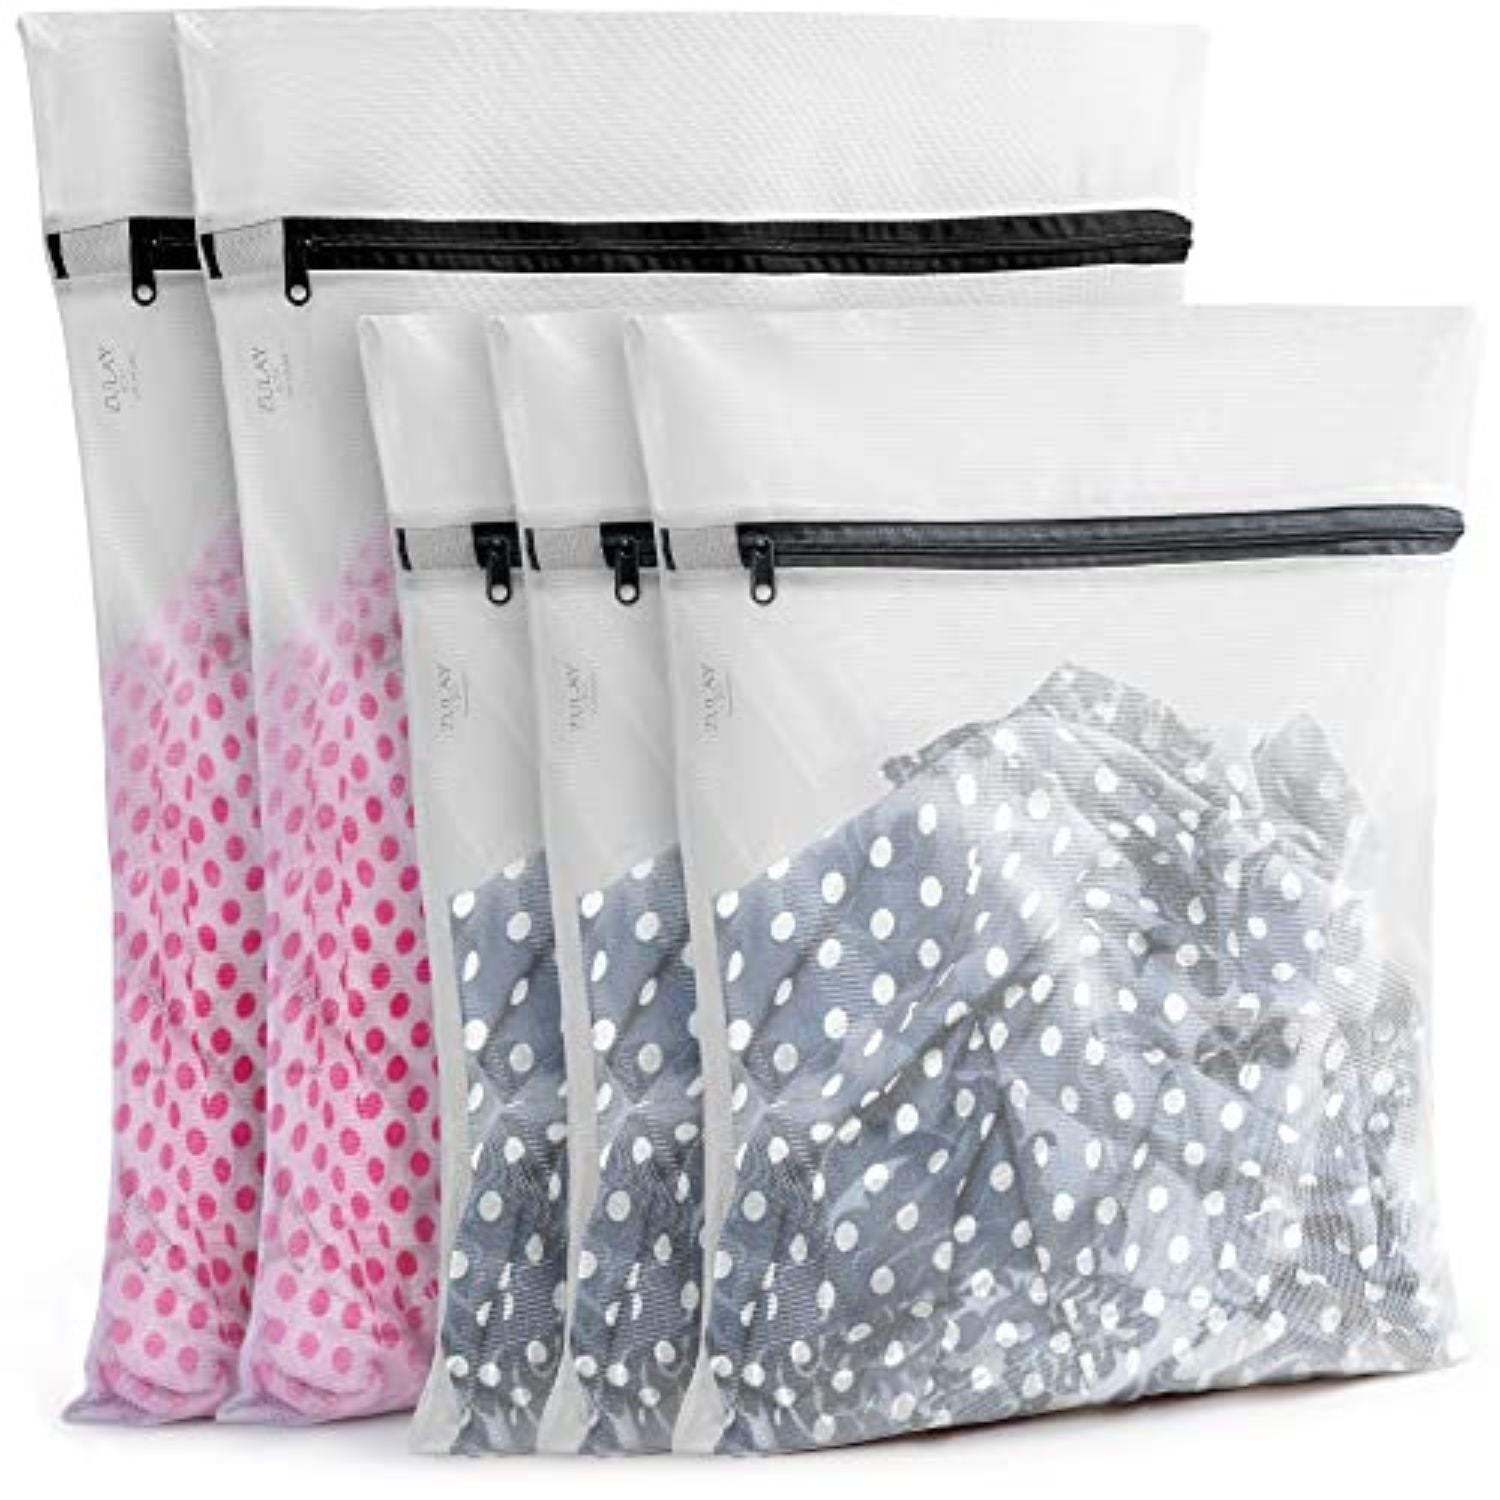 Zulay Home Mesh Laundry Bags, 3 Pack Mix1